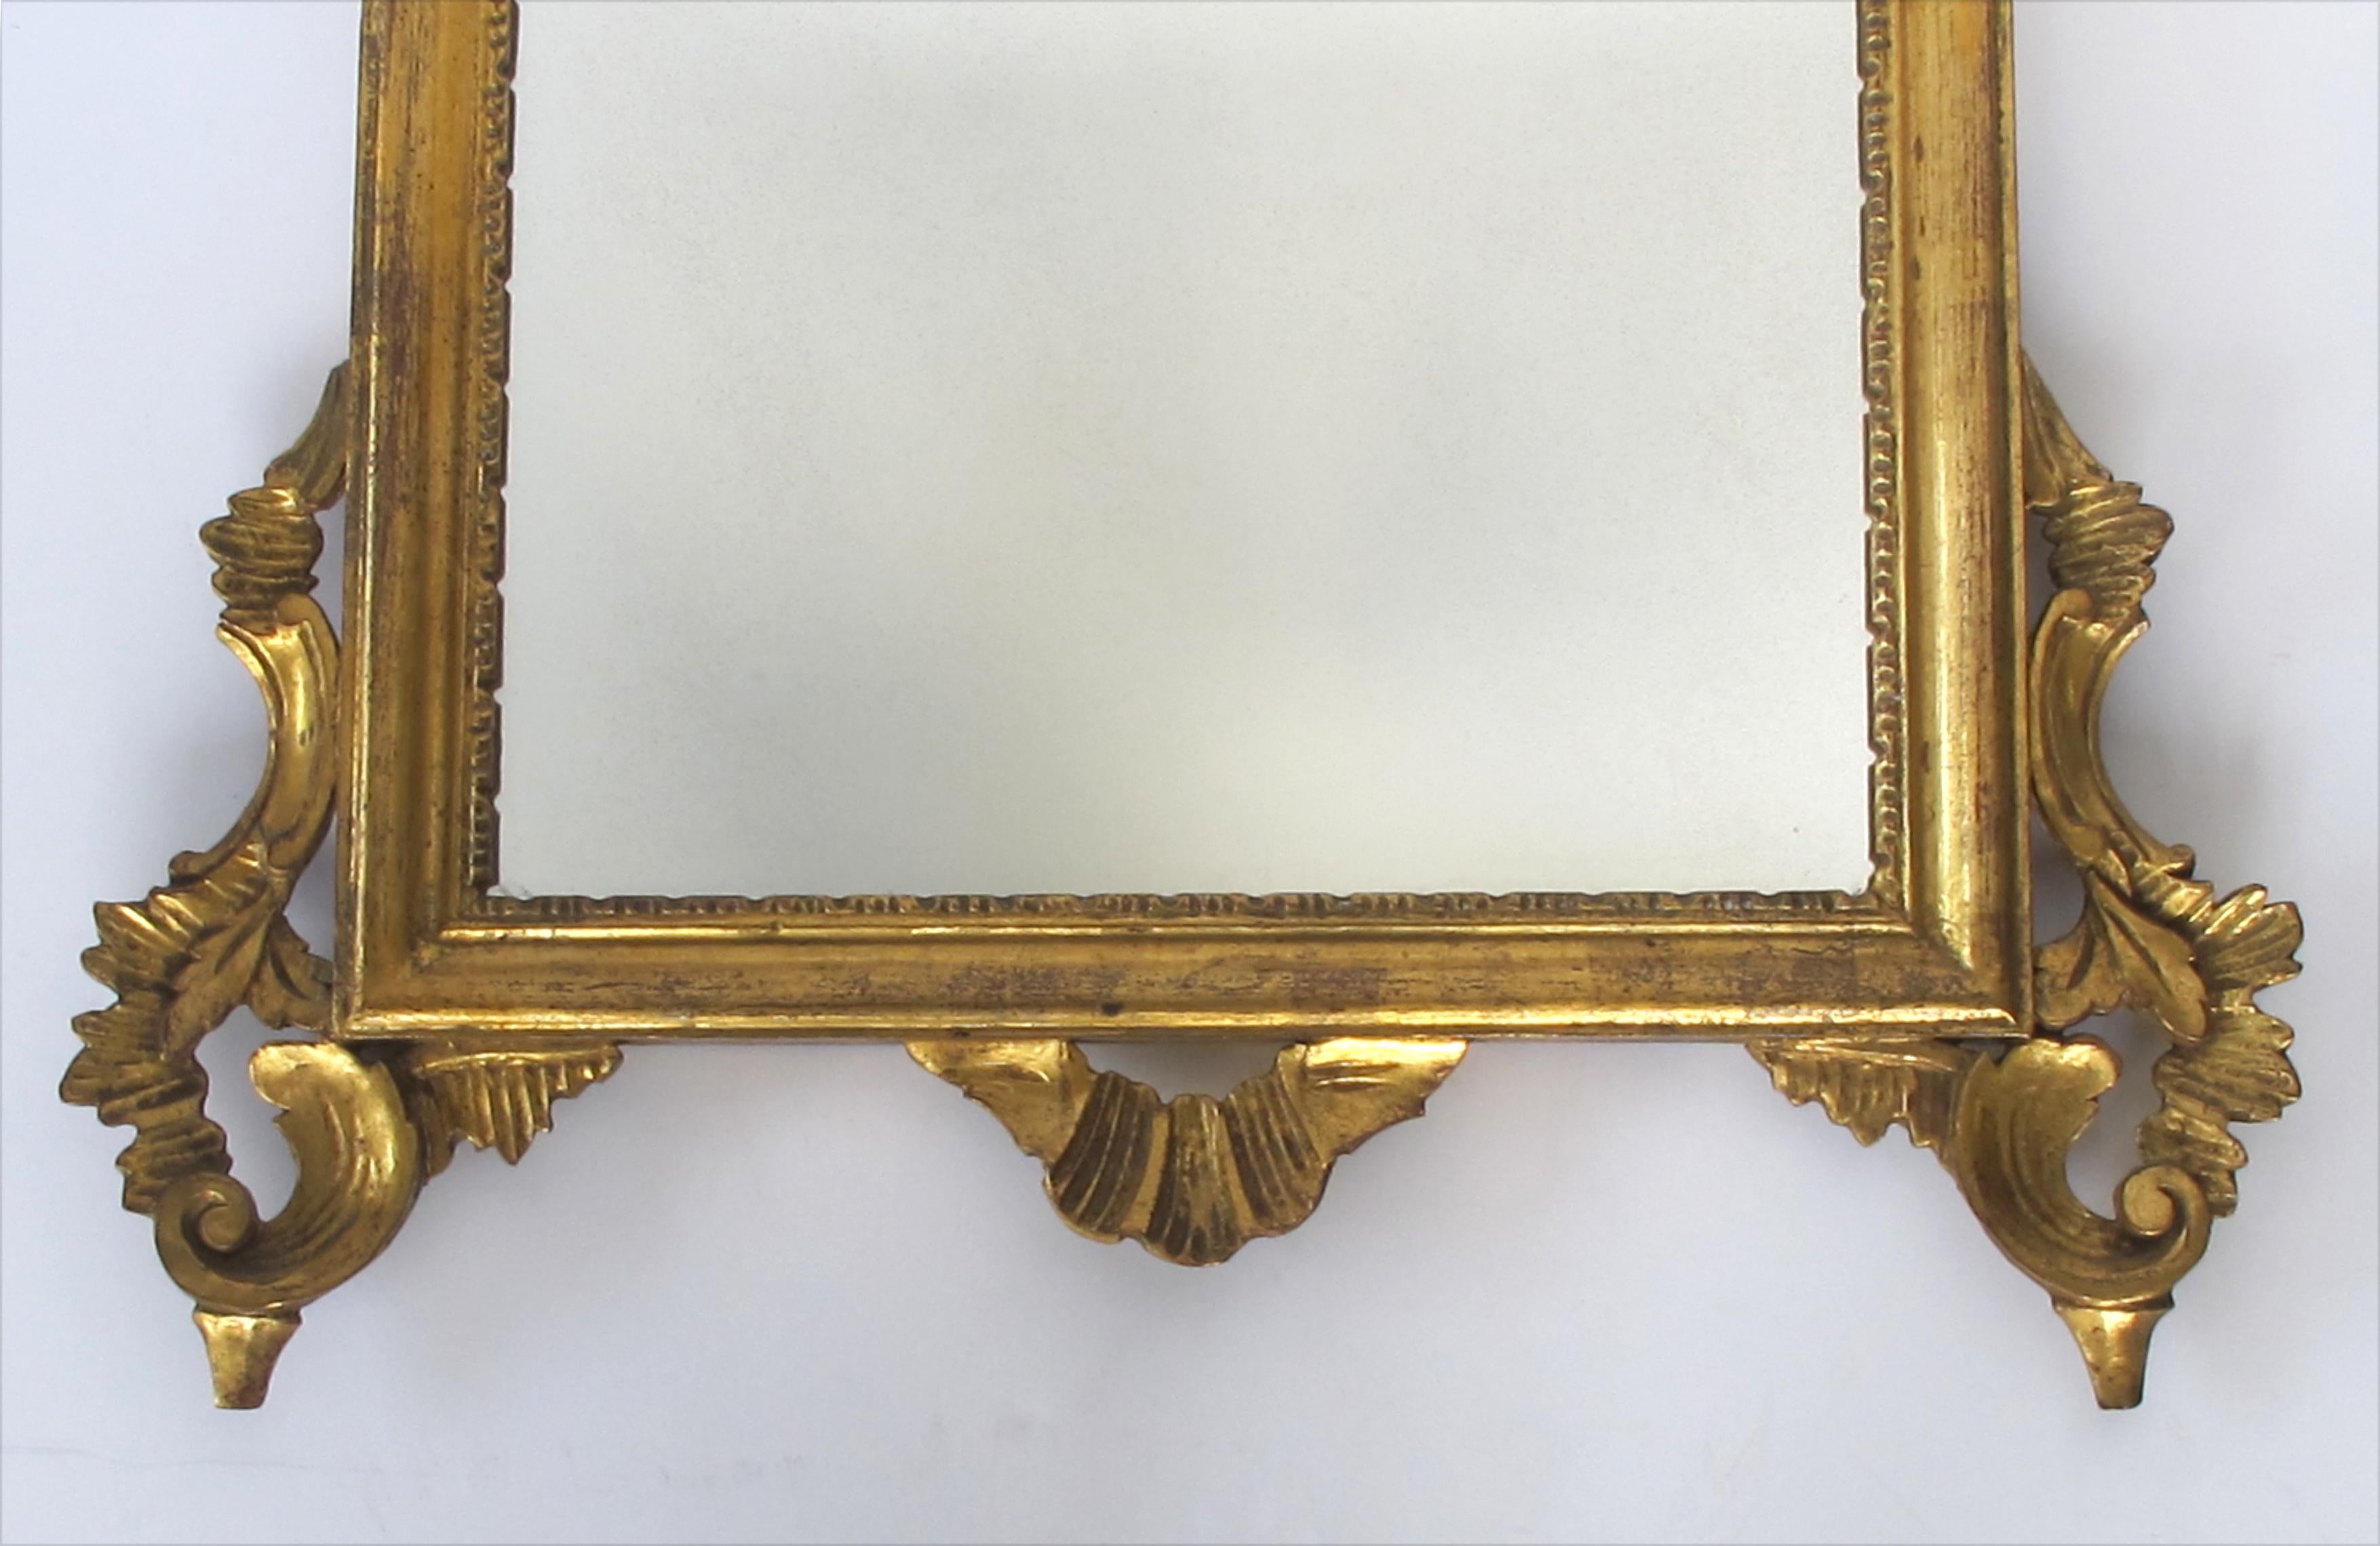 Shapely Italian Rococo Style Carved Giltwood Mirror with Openwork Rocaille Crest In Good Condition For Sale In San Francisco, CA